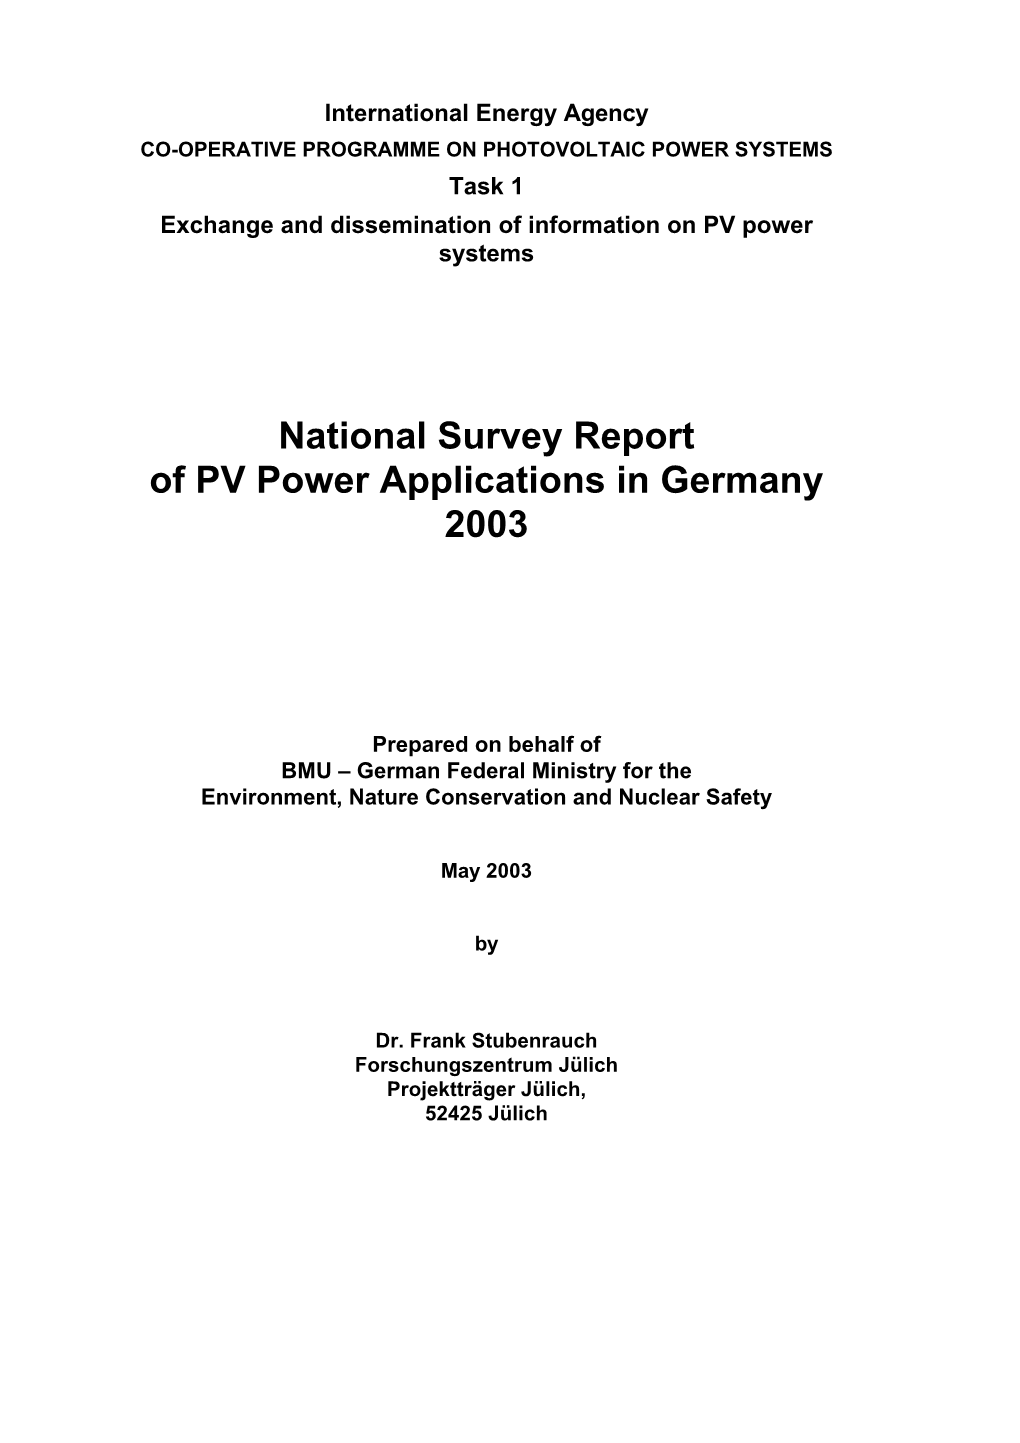 National Survey Report of PV Power Applications in Germany, 20